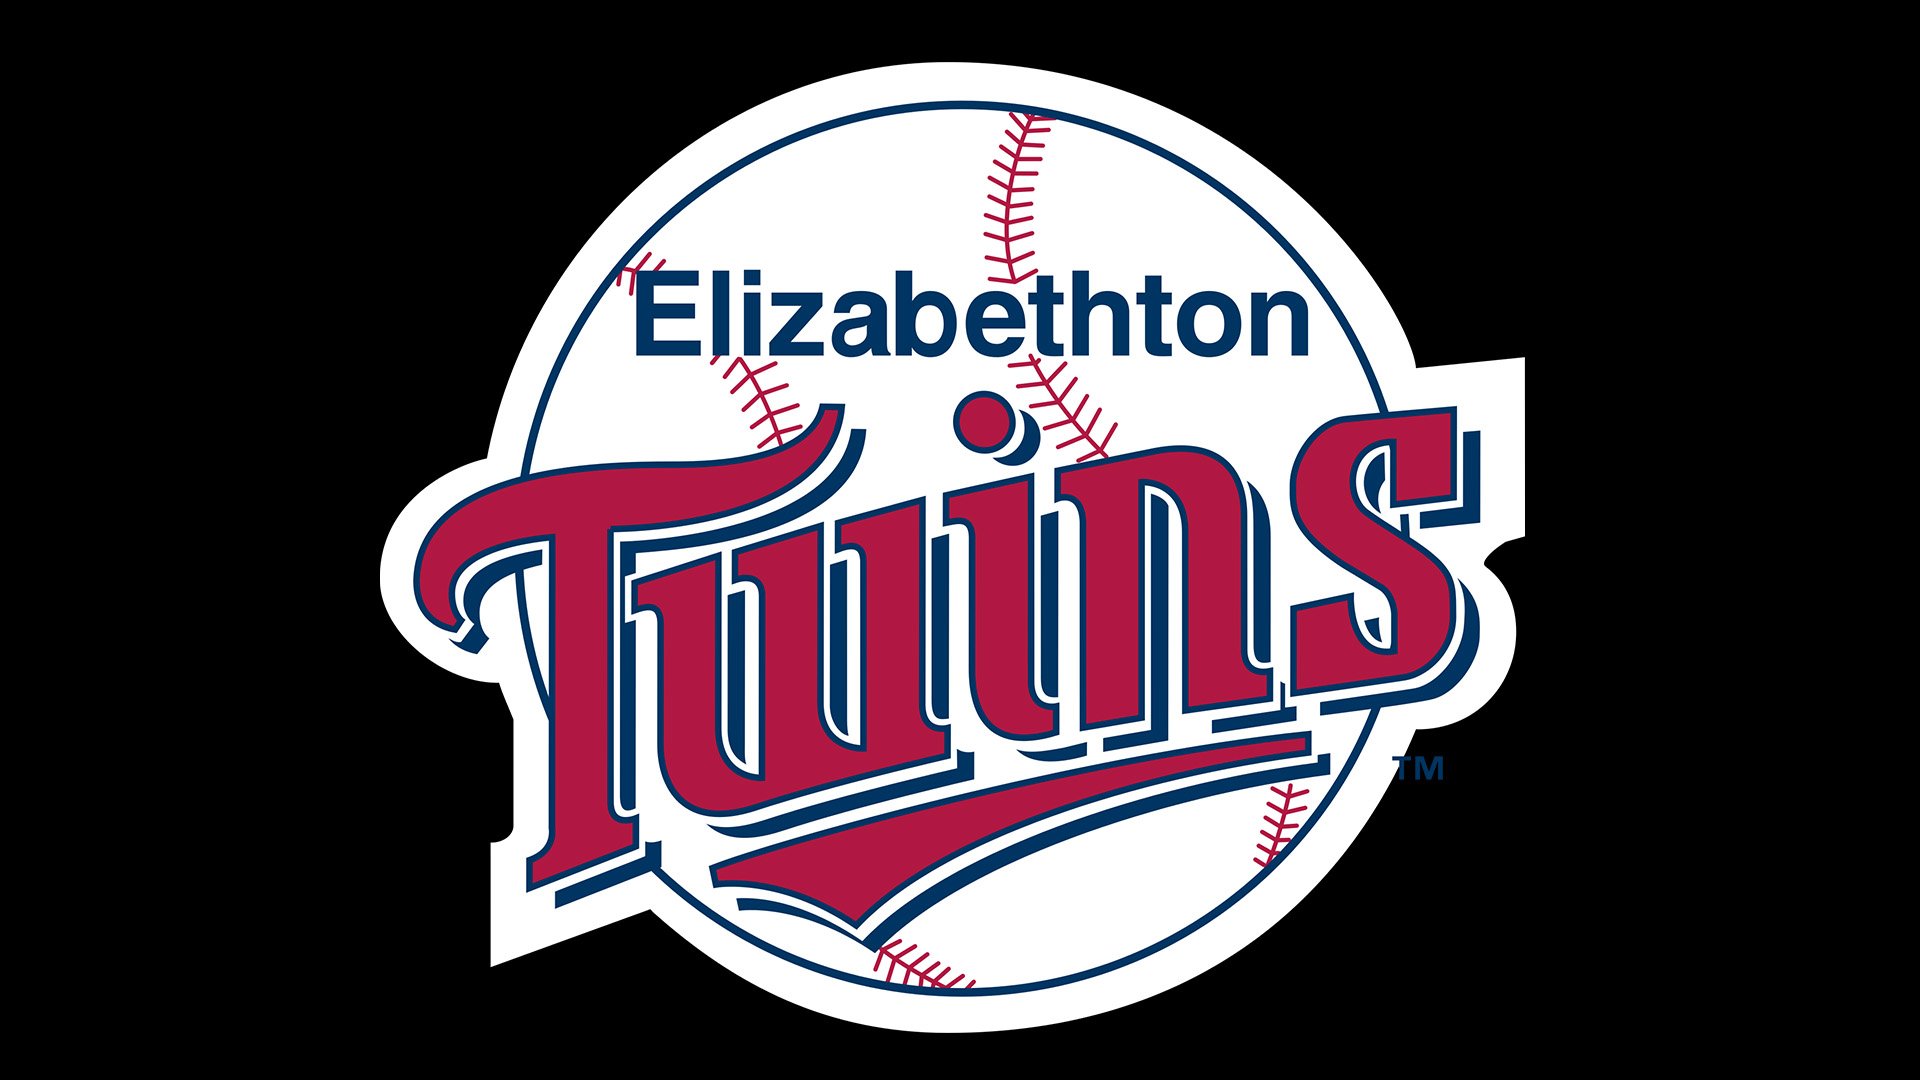 Meaning Elizabethton Twins logo and symbol | history and evolution1920 x 1080